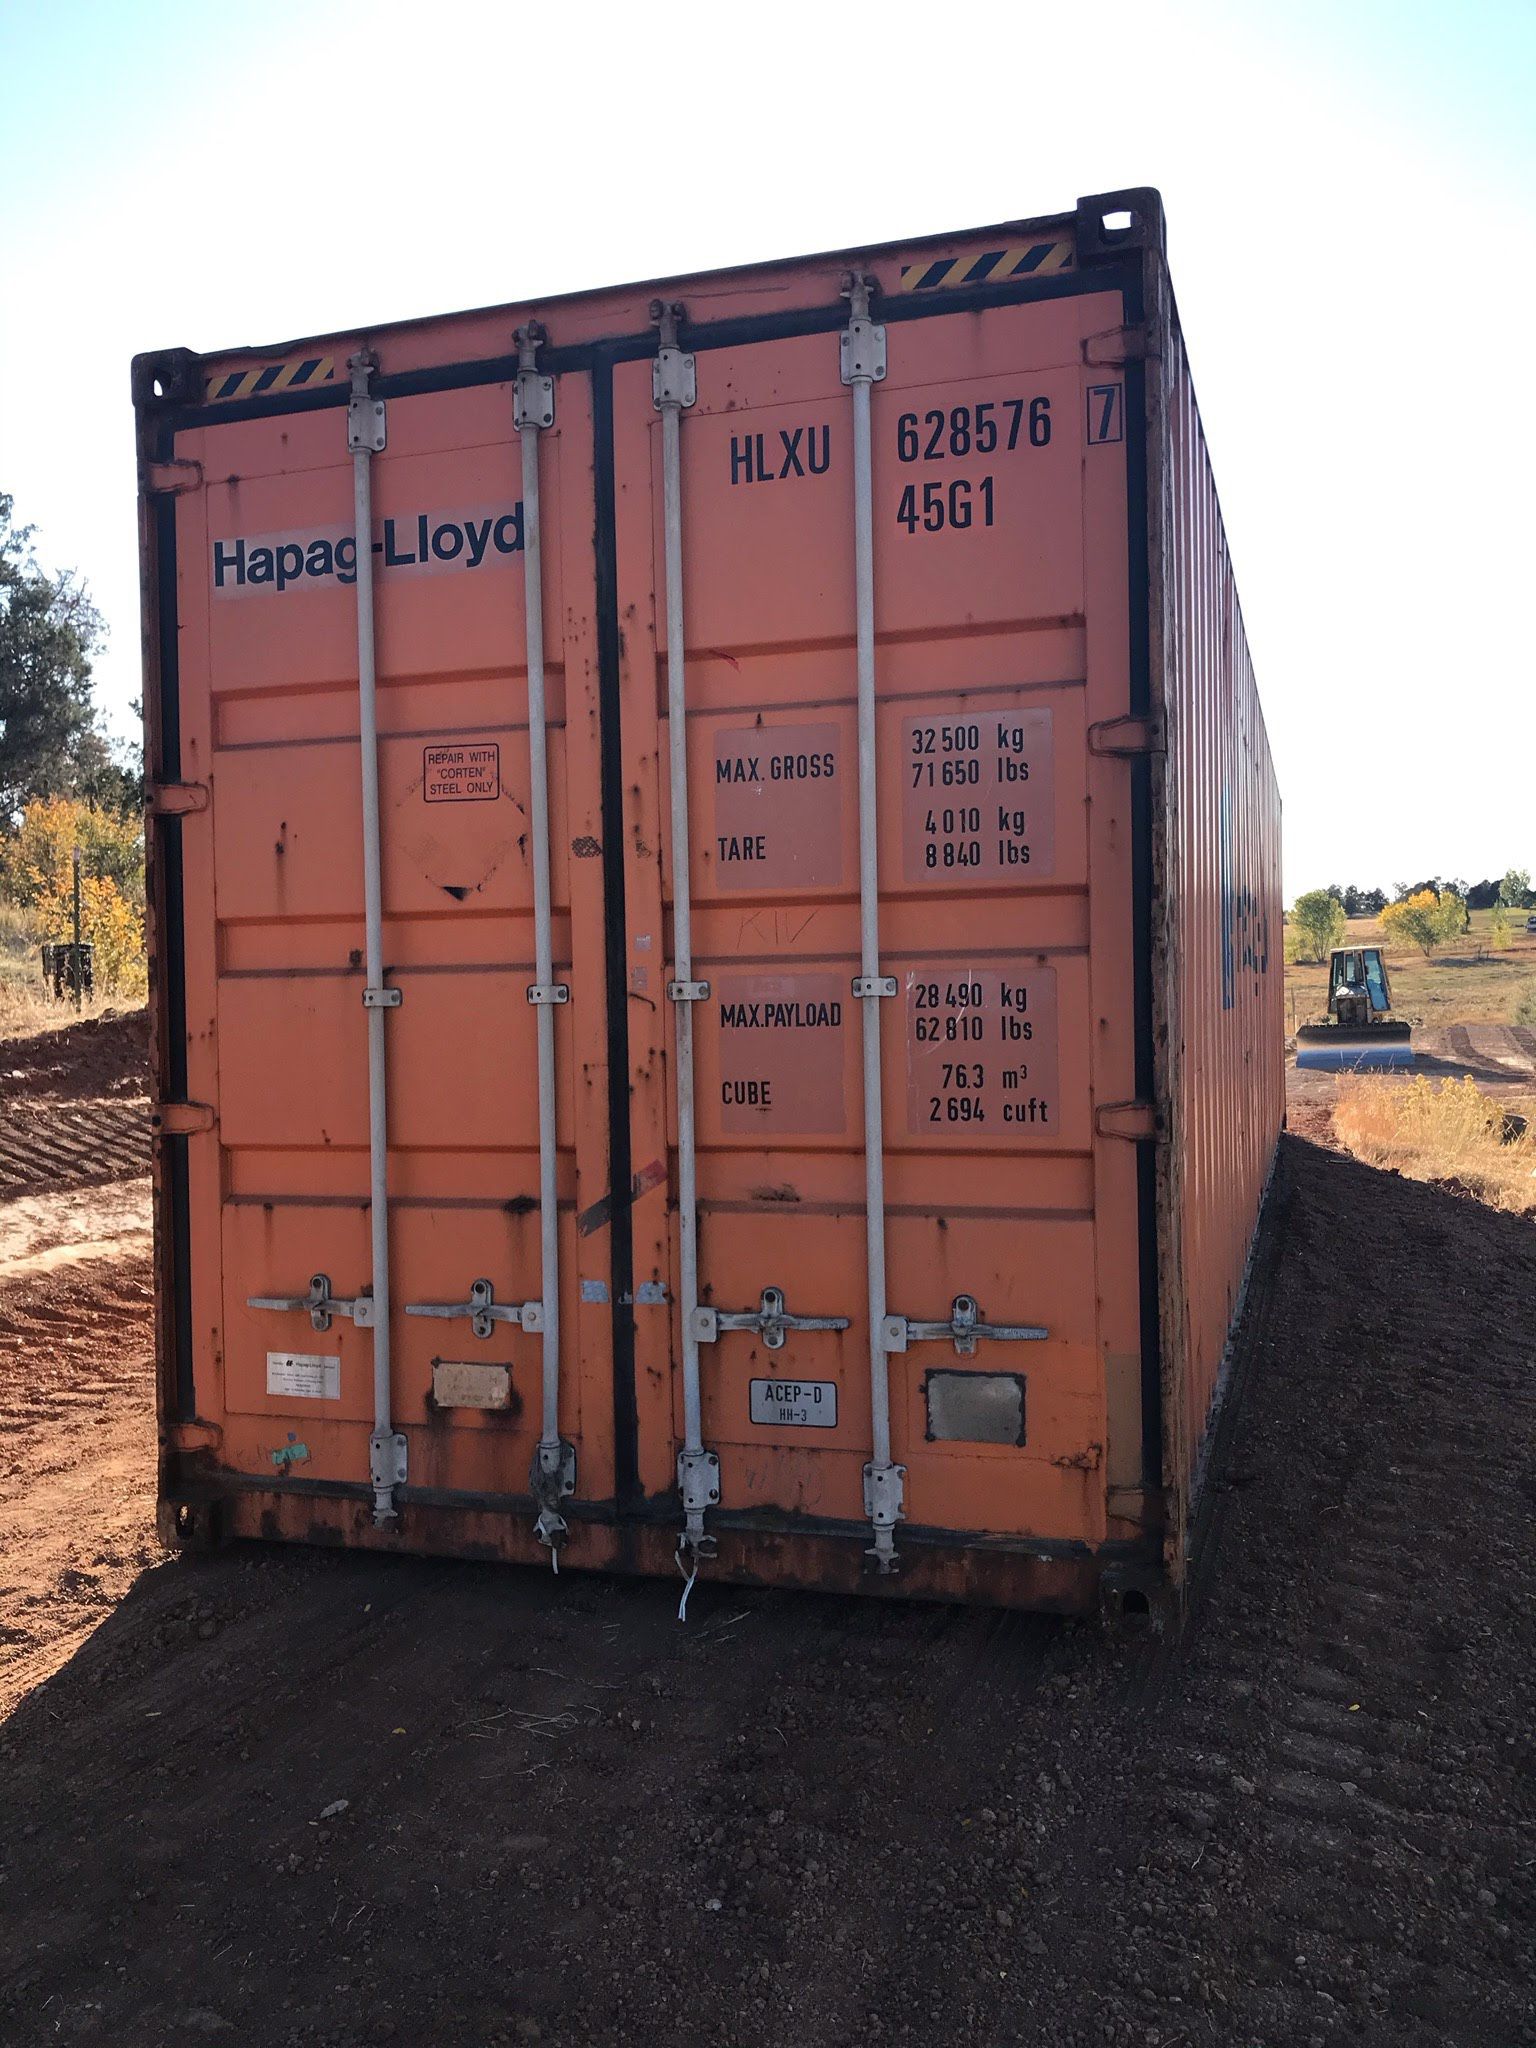 SHIPPING / STORAGE CONTAINERS. 20,40,40HC . BUY/SELL .Financing & Lease Available! 